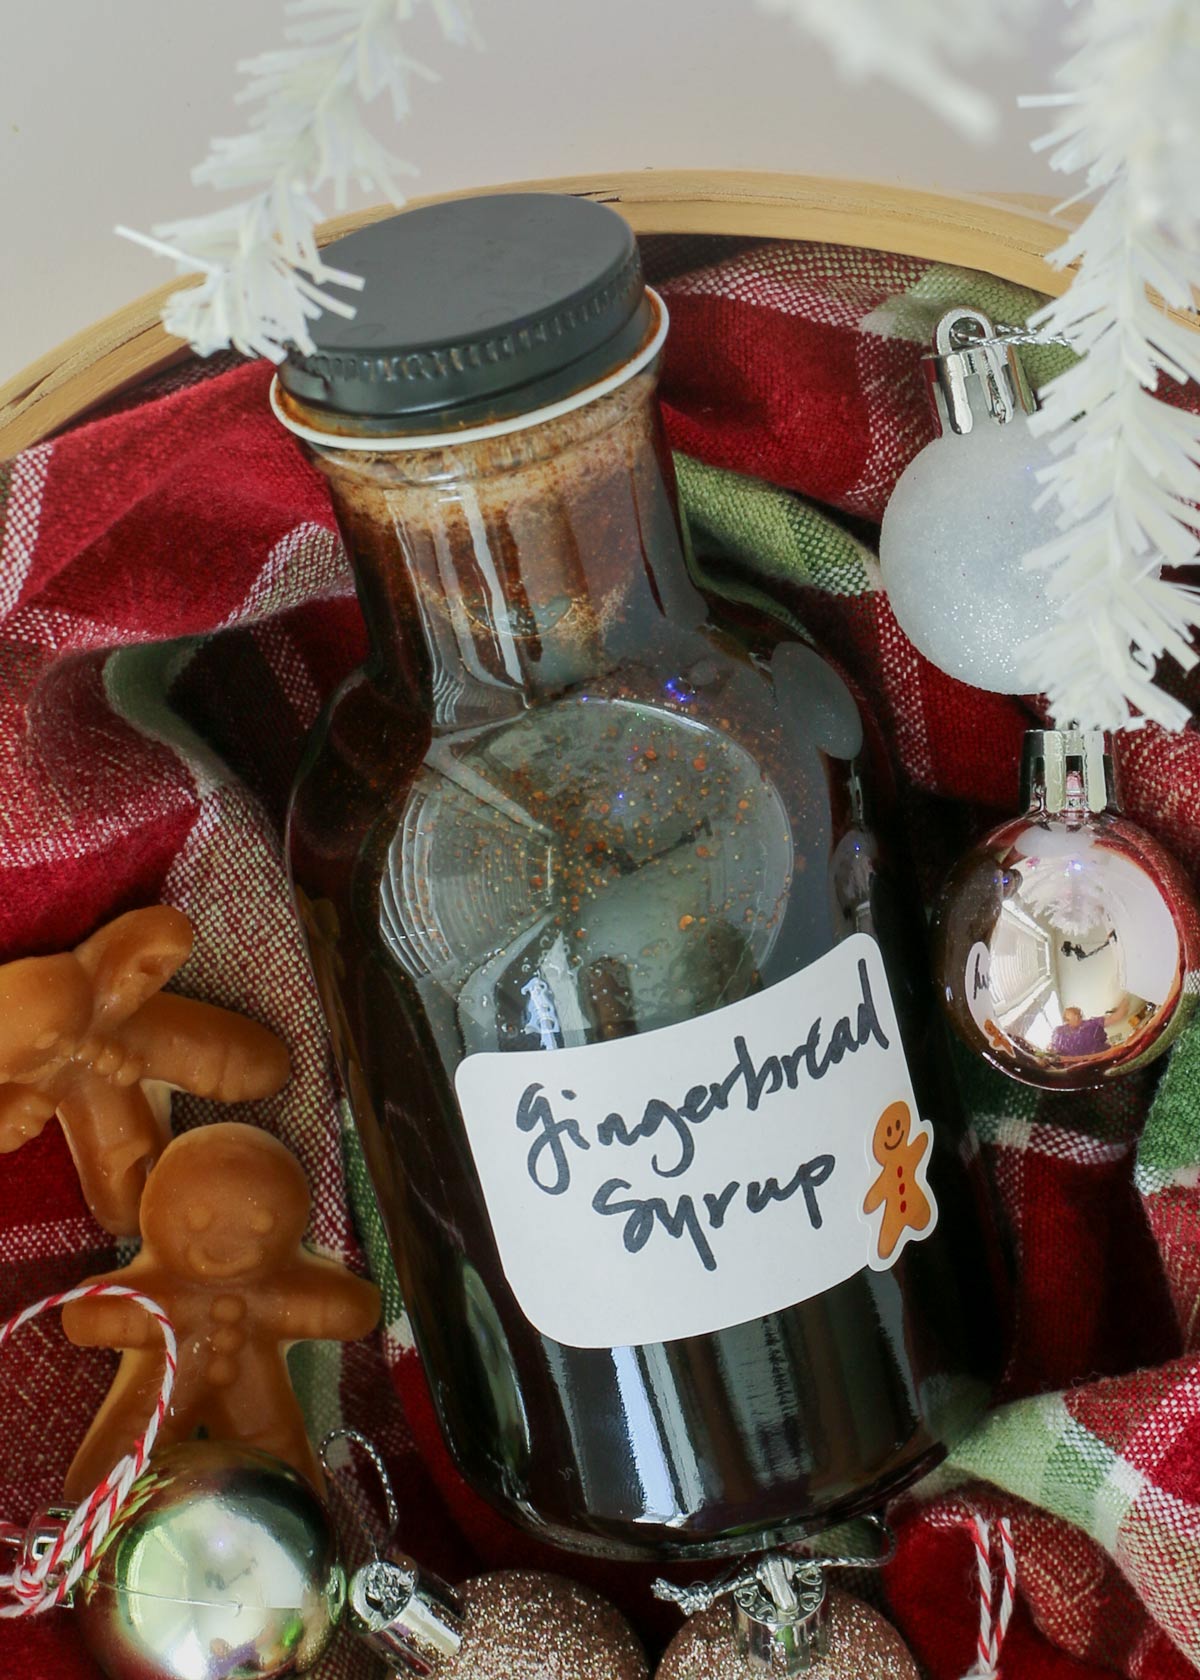 bottle of gingerbread syrup in a basket with ornaments and candies.